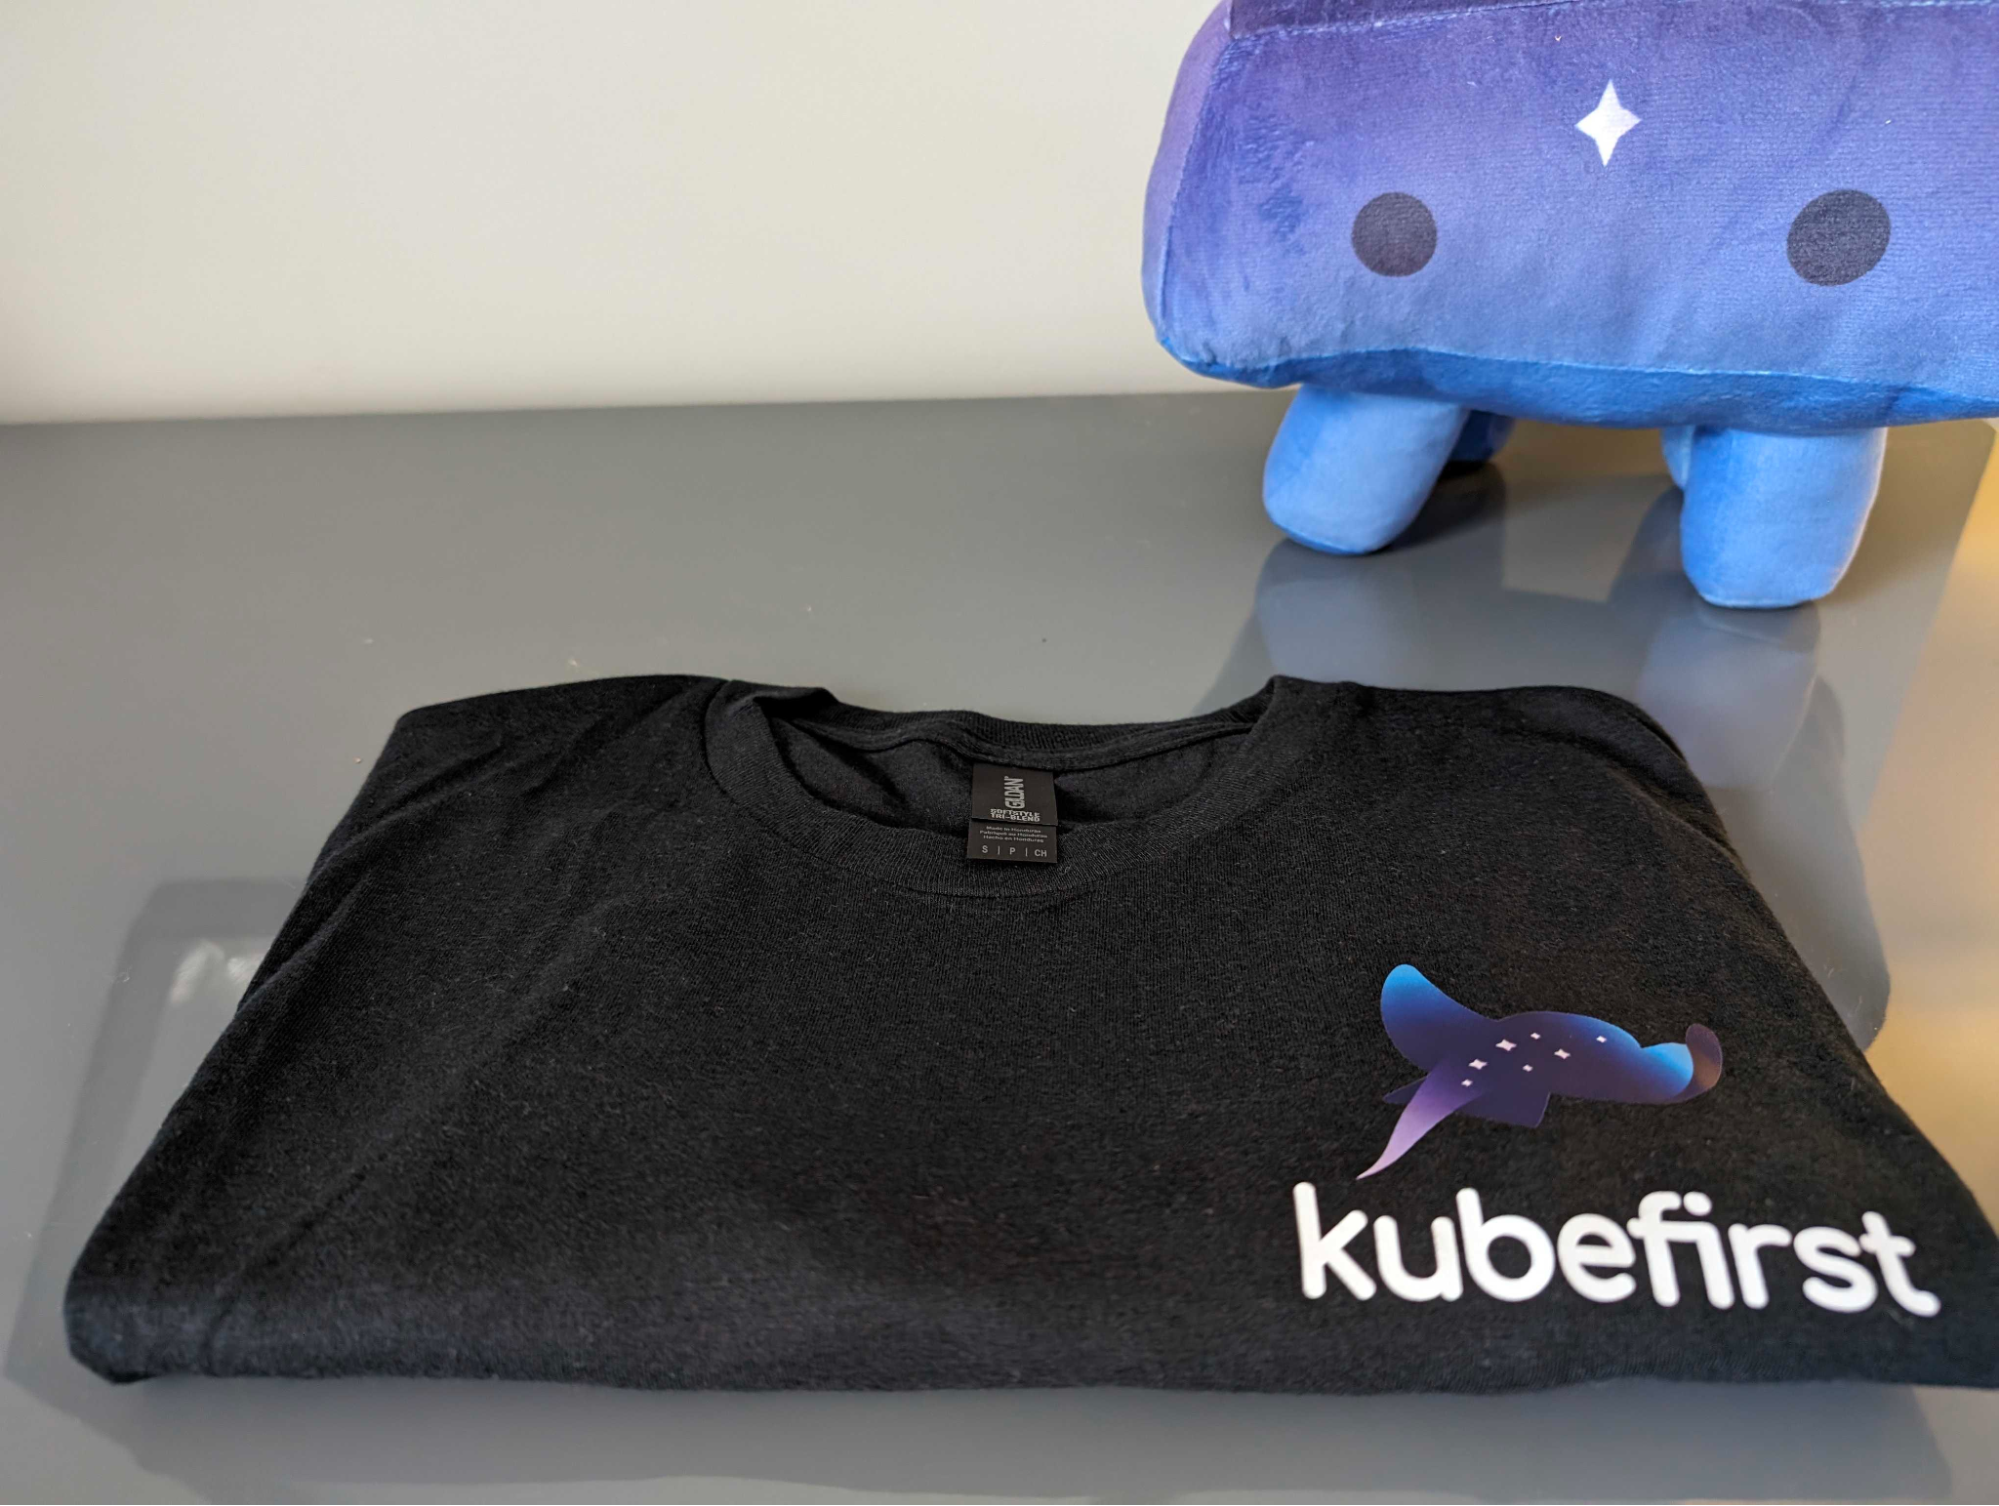 See You at KubeCon Next Week